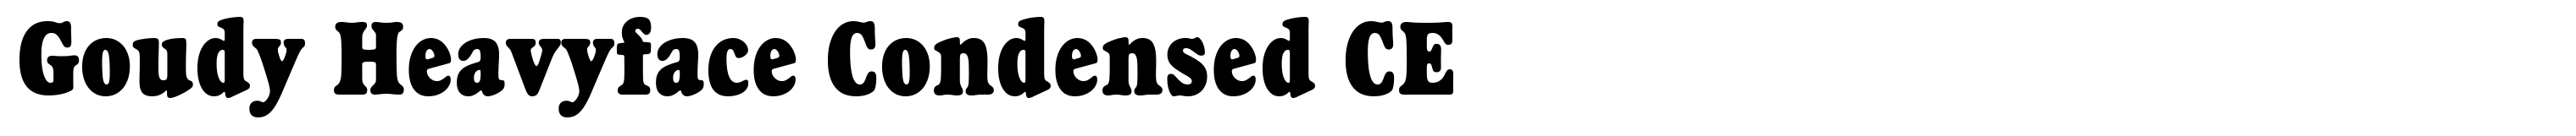 Goudy Heavyface Condensed CE